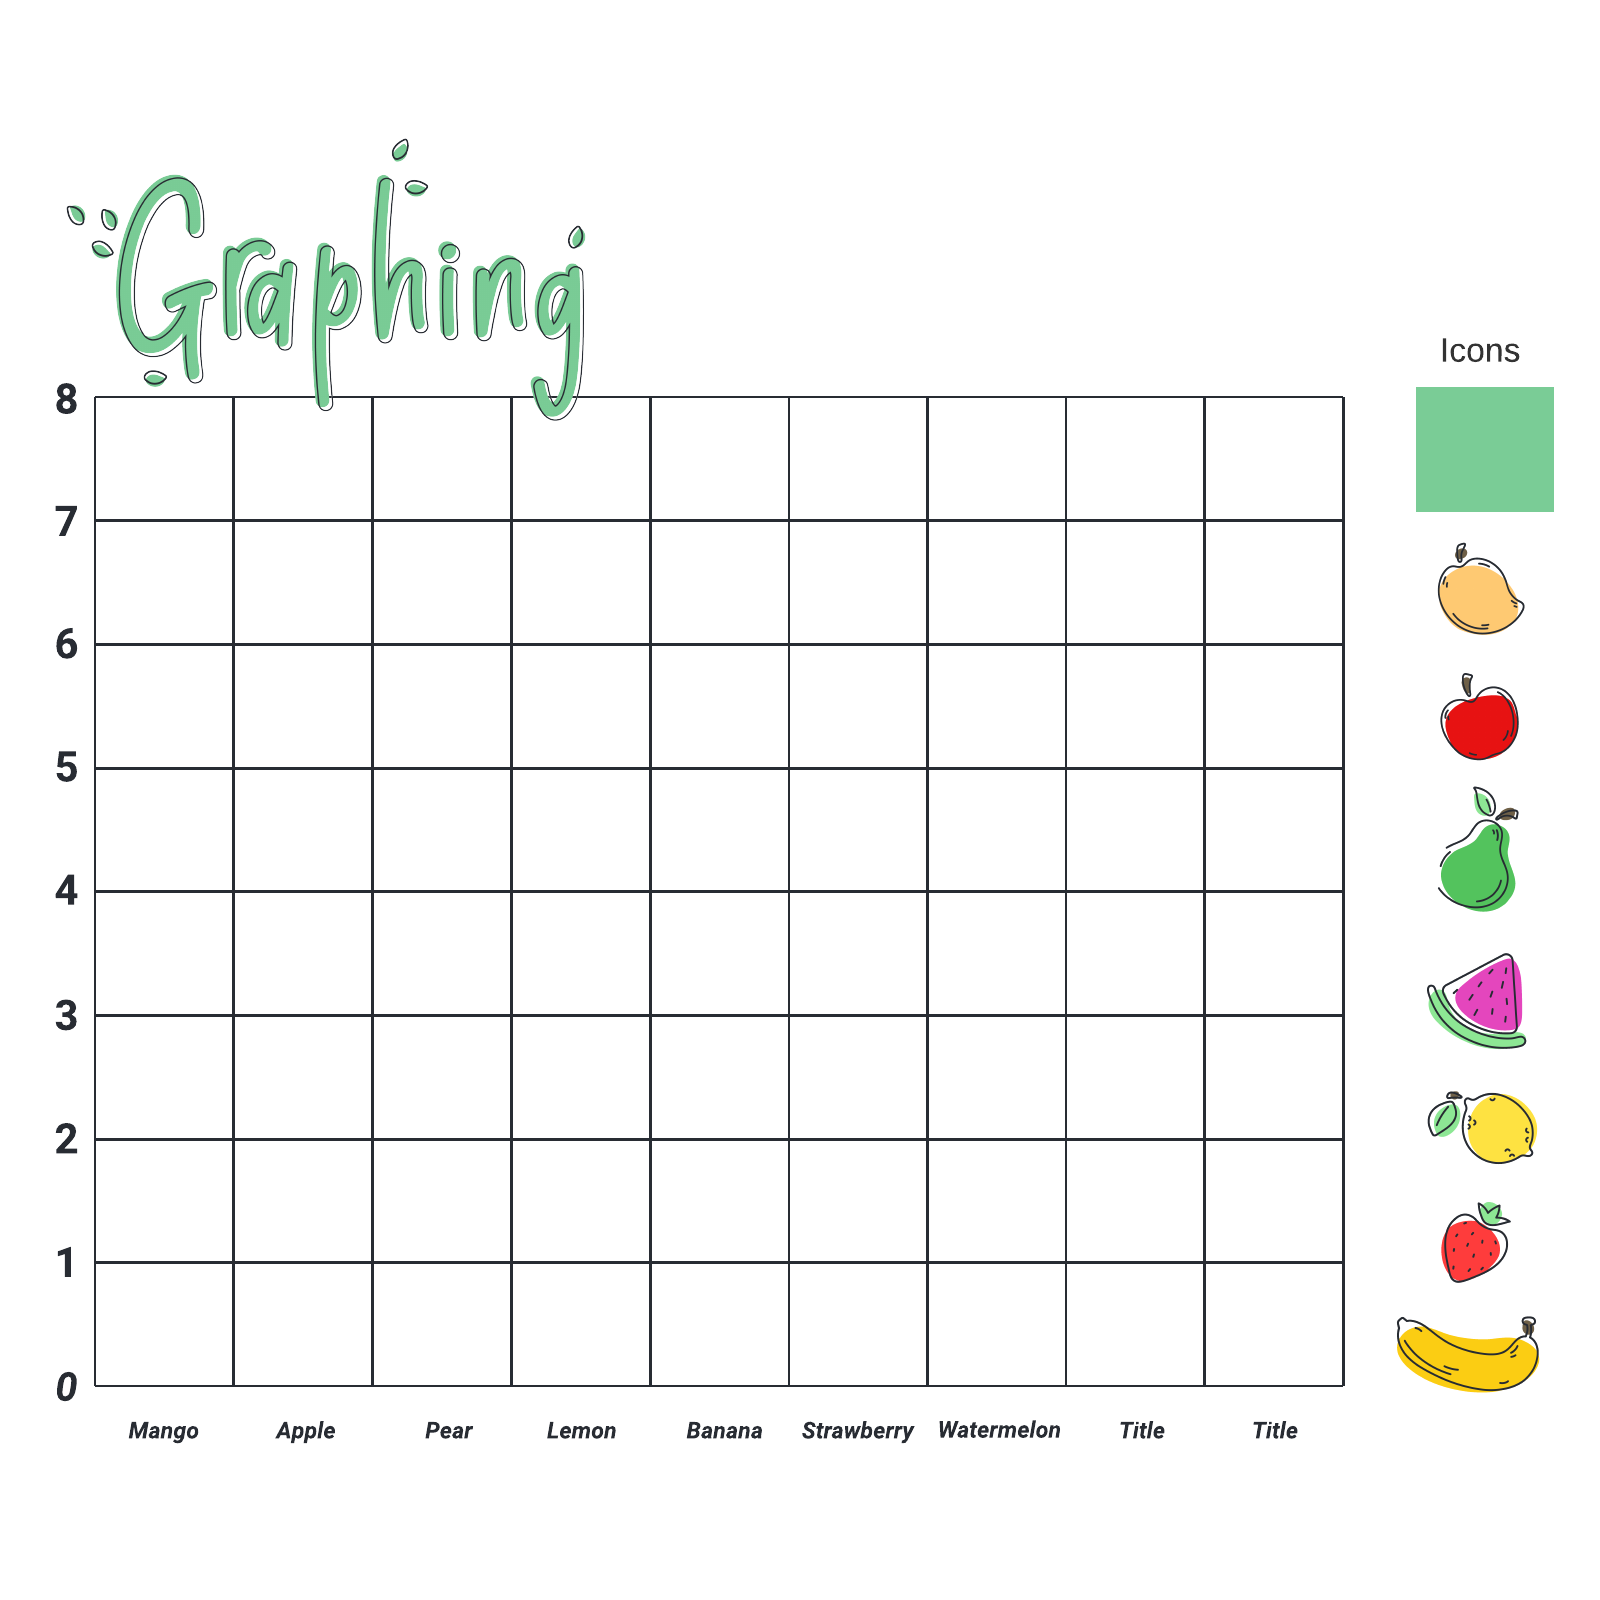 Graphing example